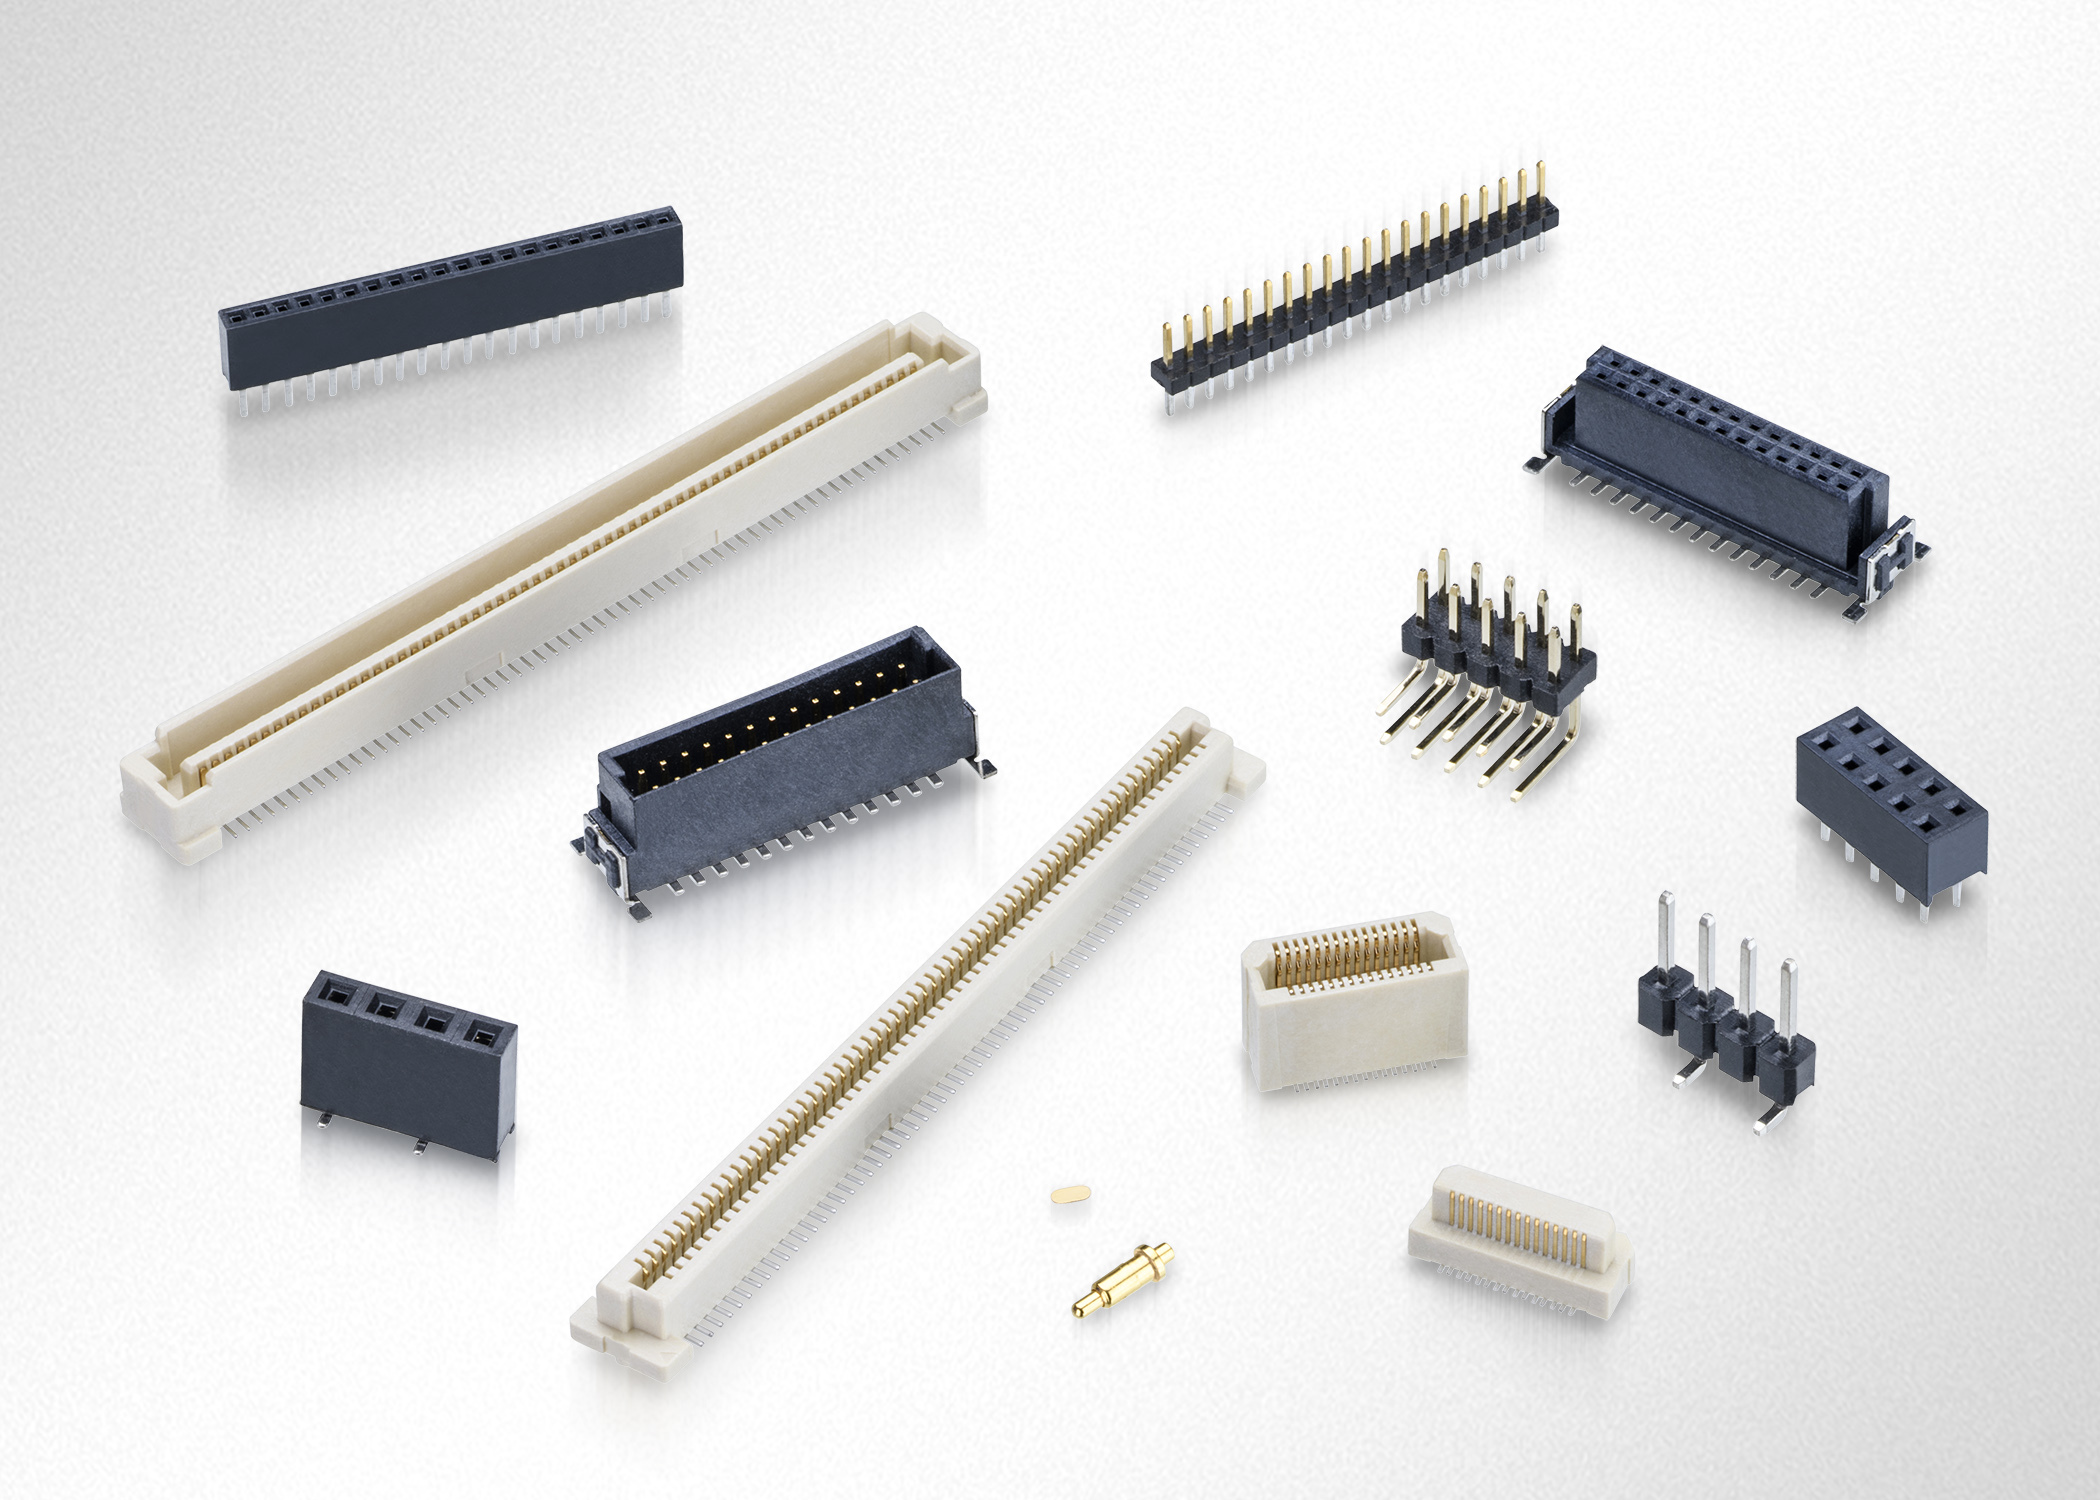 Harwin Showcases Performance-Enhanced, Cost-Effective Industrial Connectors